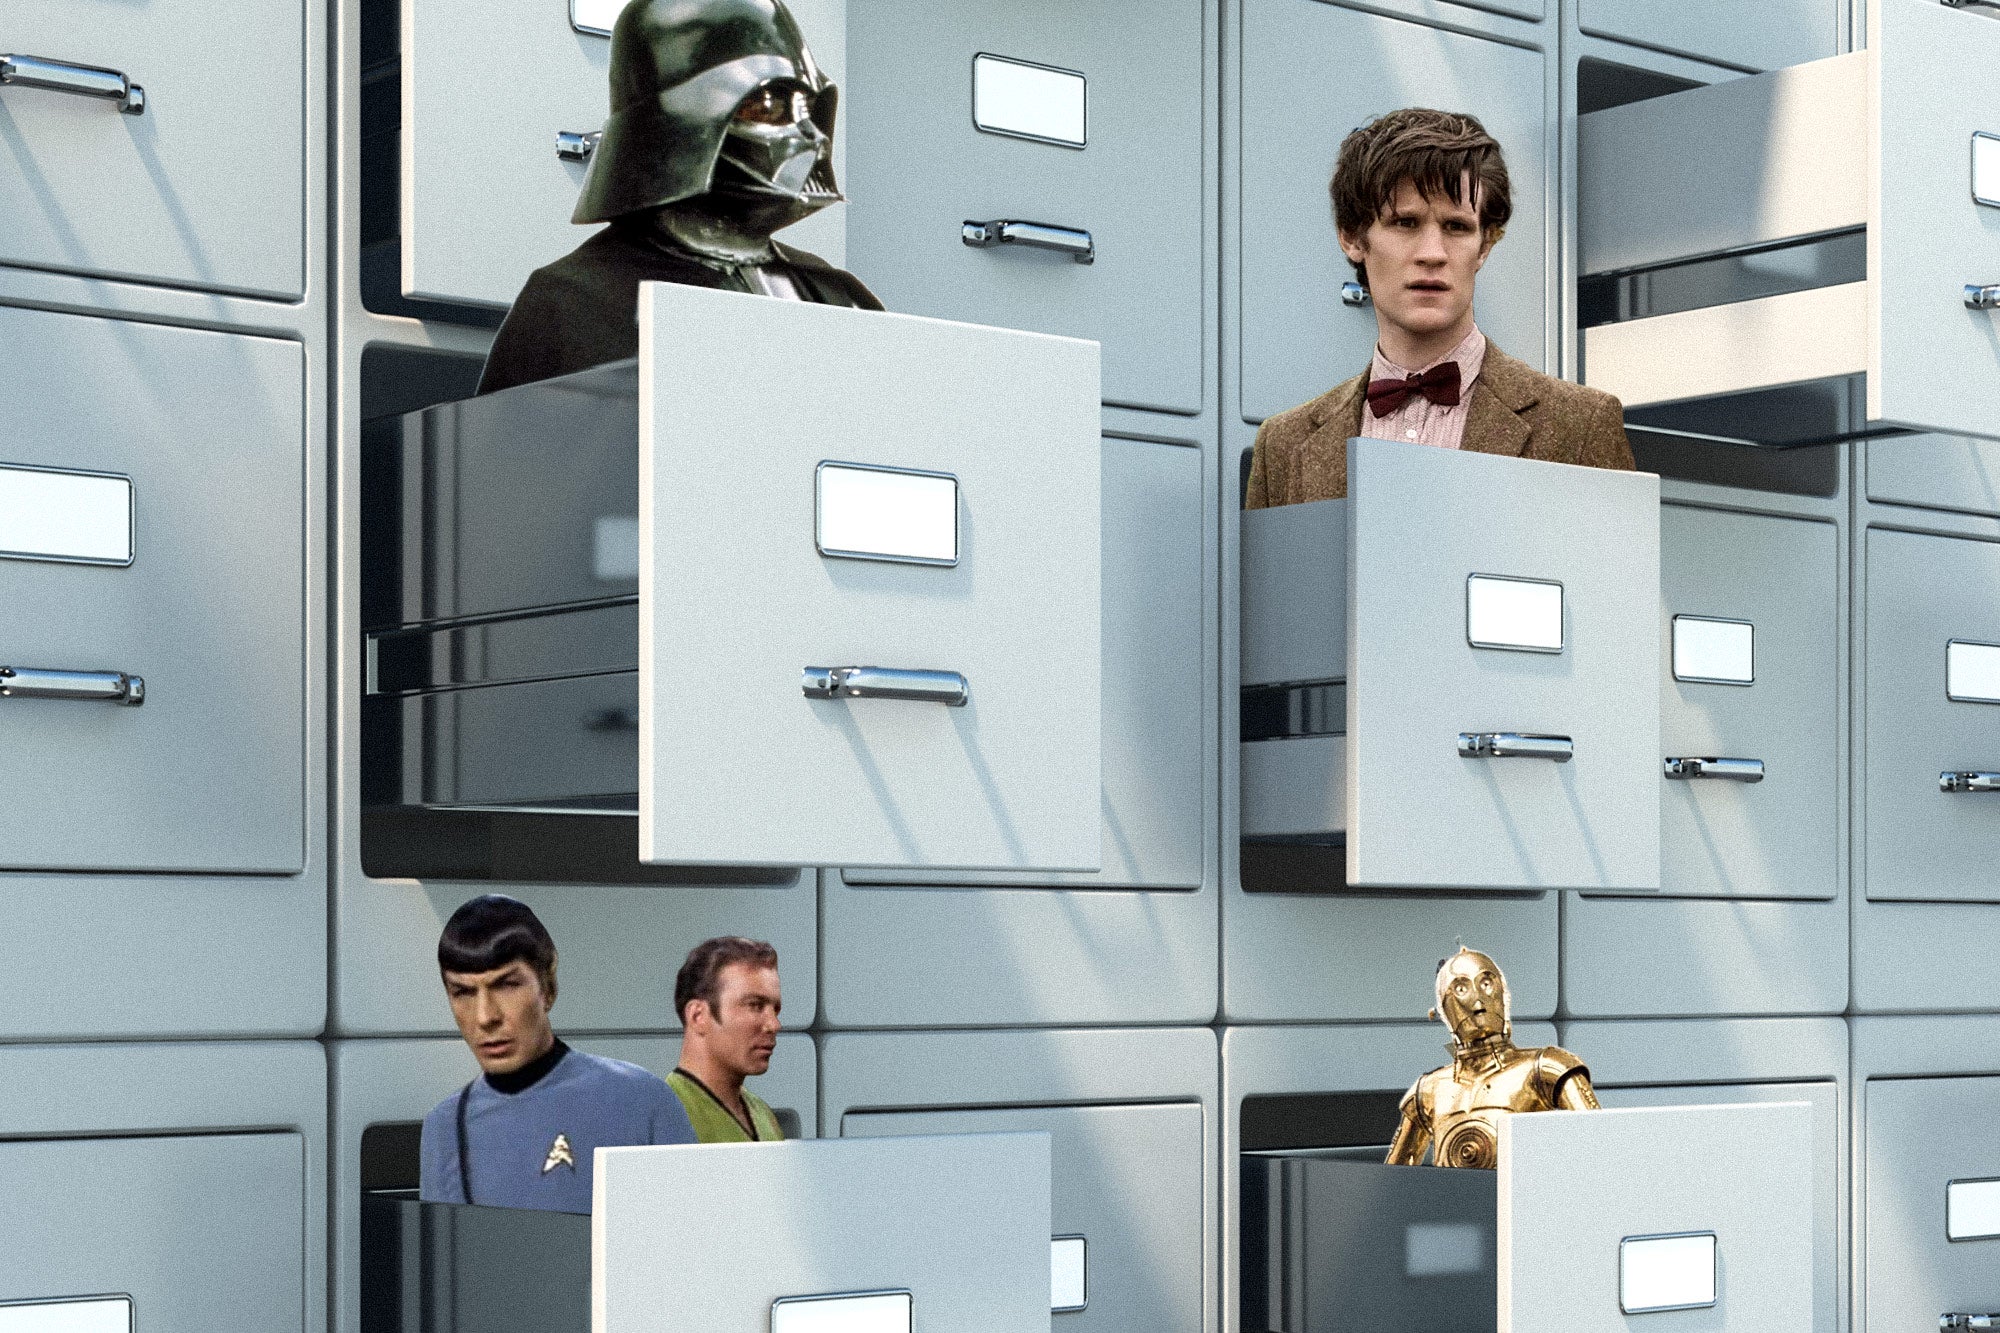 In a row of file cabinets, Darth Vader, Matt Smith as the Doctor, Kirk and Spock, and C-3PO pop up from open drawers.